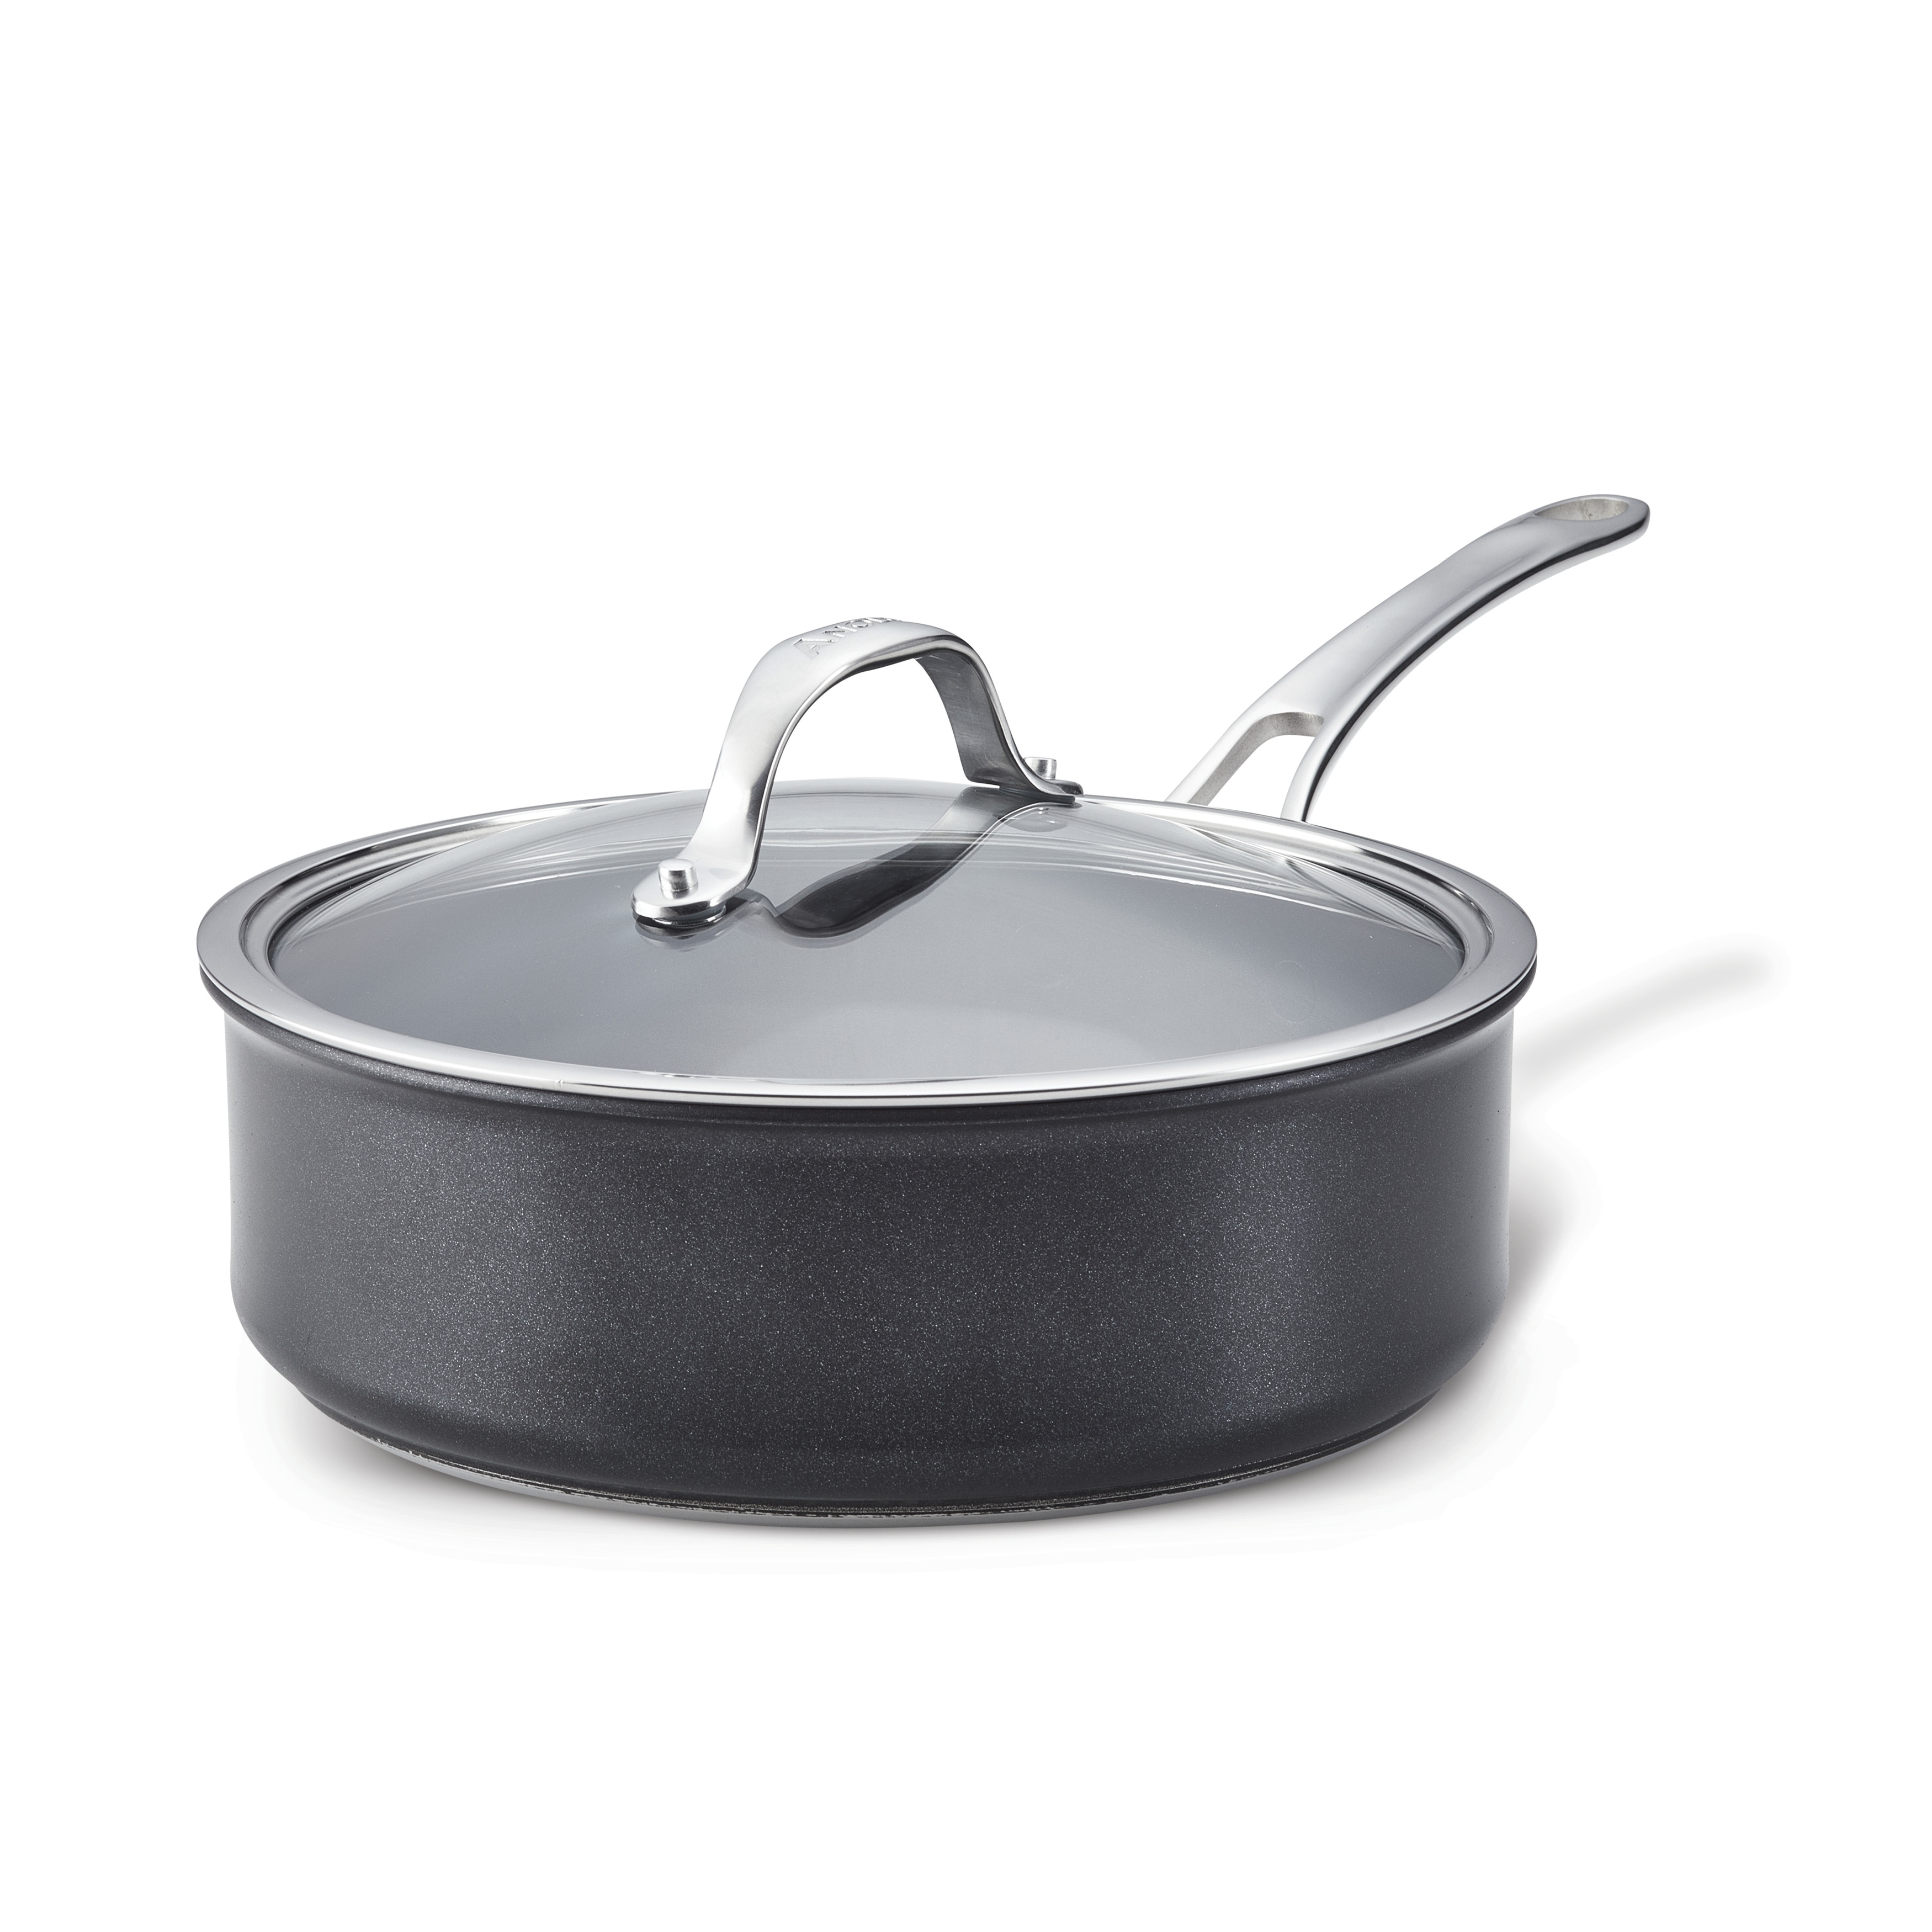 https://ak1.ostkcdn.com/images/products/is/images/direct/d9c347fc2b2c0ee0a626d8b26821b8092252bd4f/Anolon-X-Hybrid-Nonstick-Induction-Saute-Pan-With-Lid%2C-3.5-Quart%2C-Super-Dark-Gray.jpg